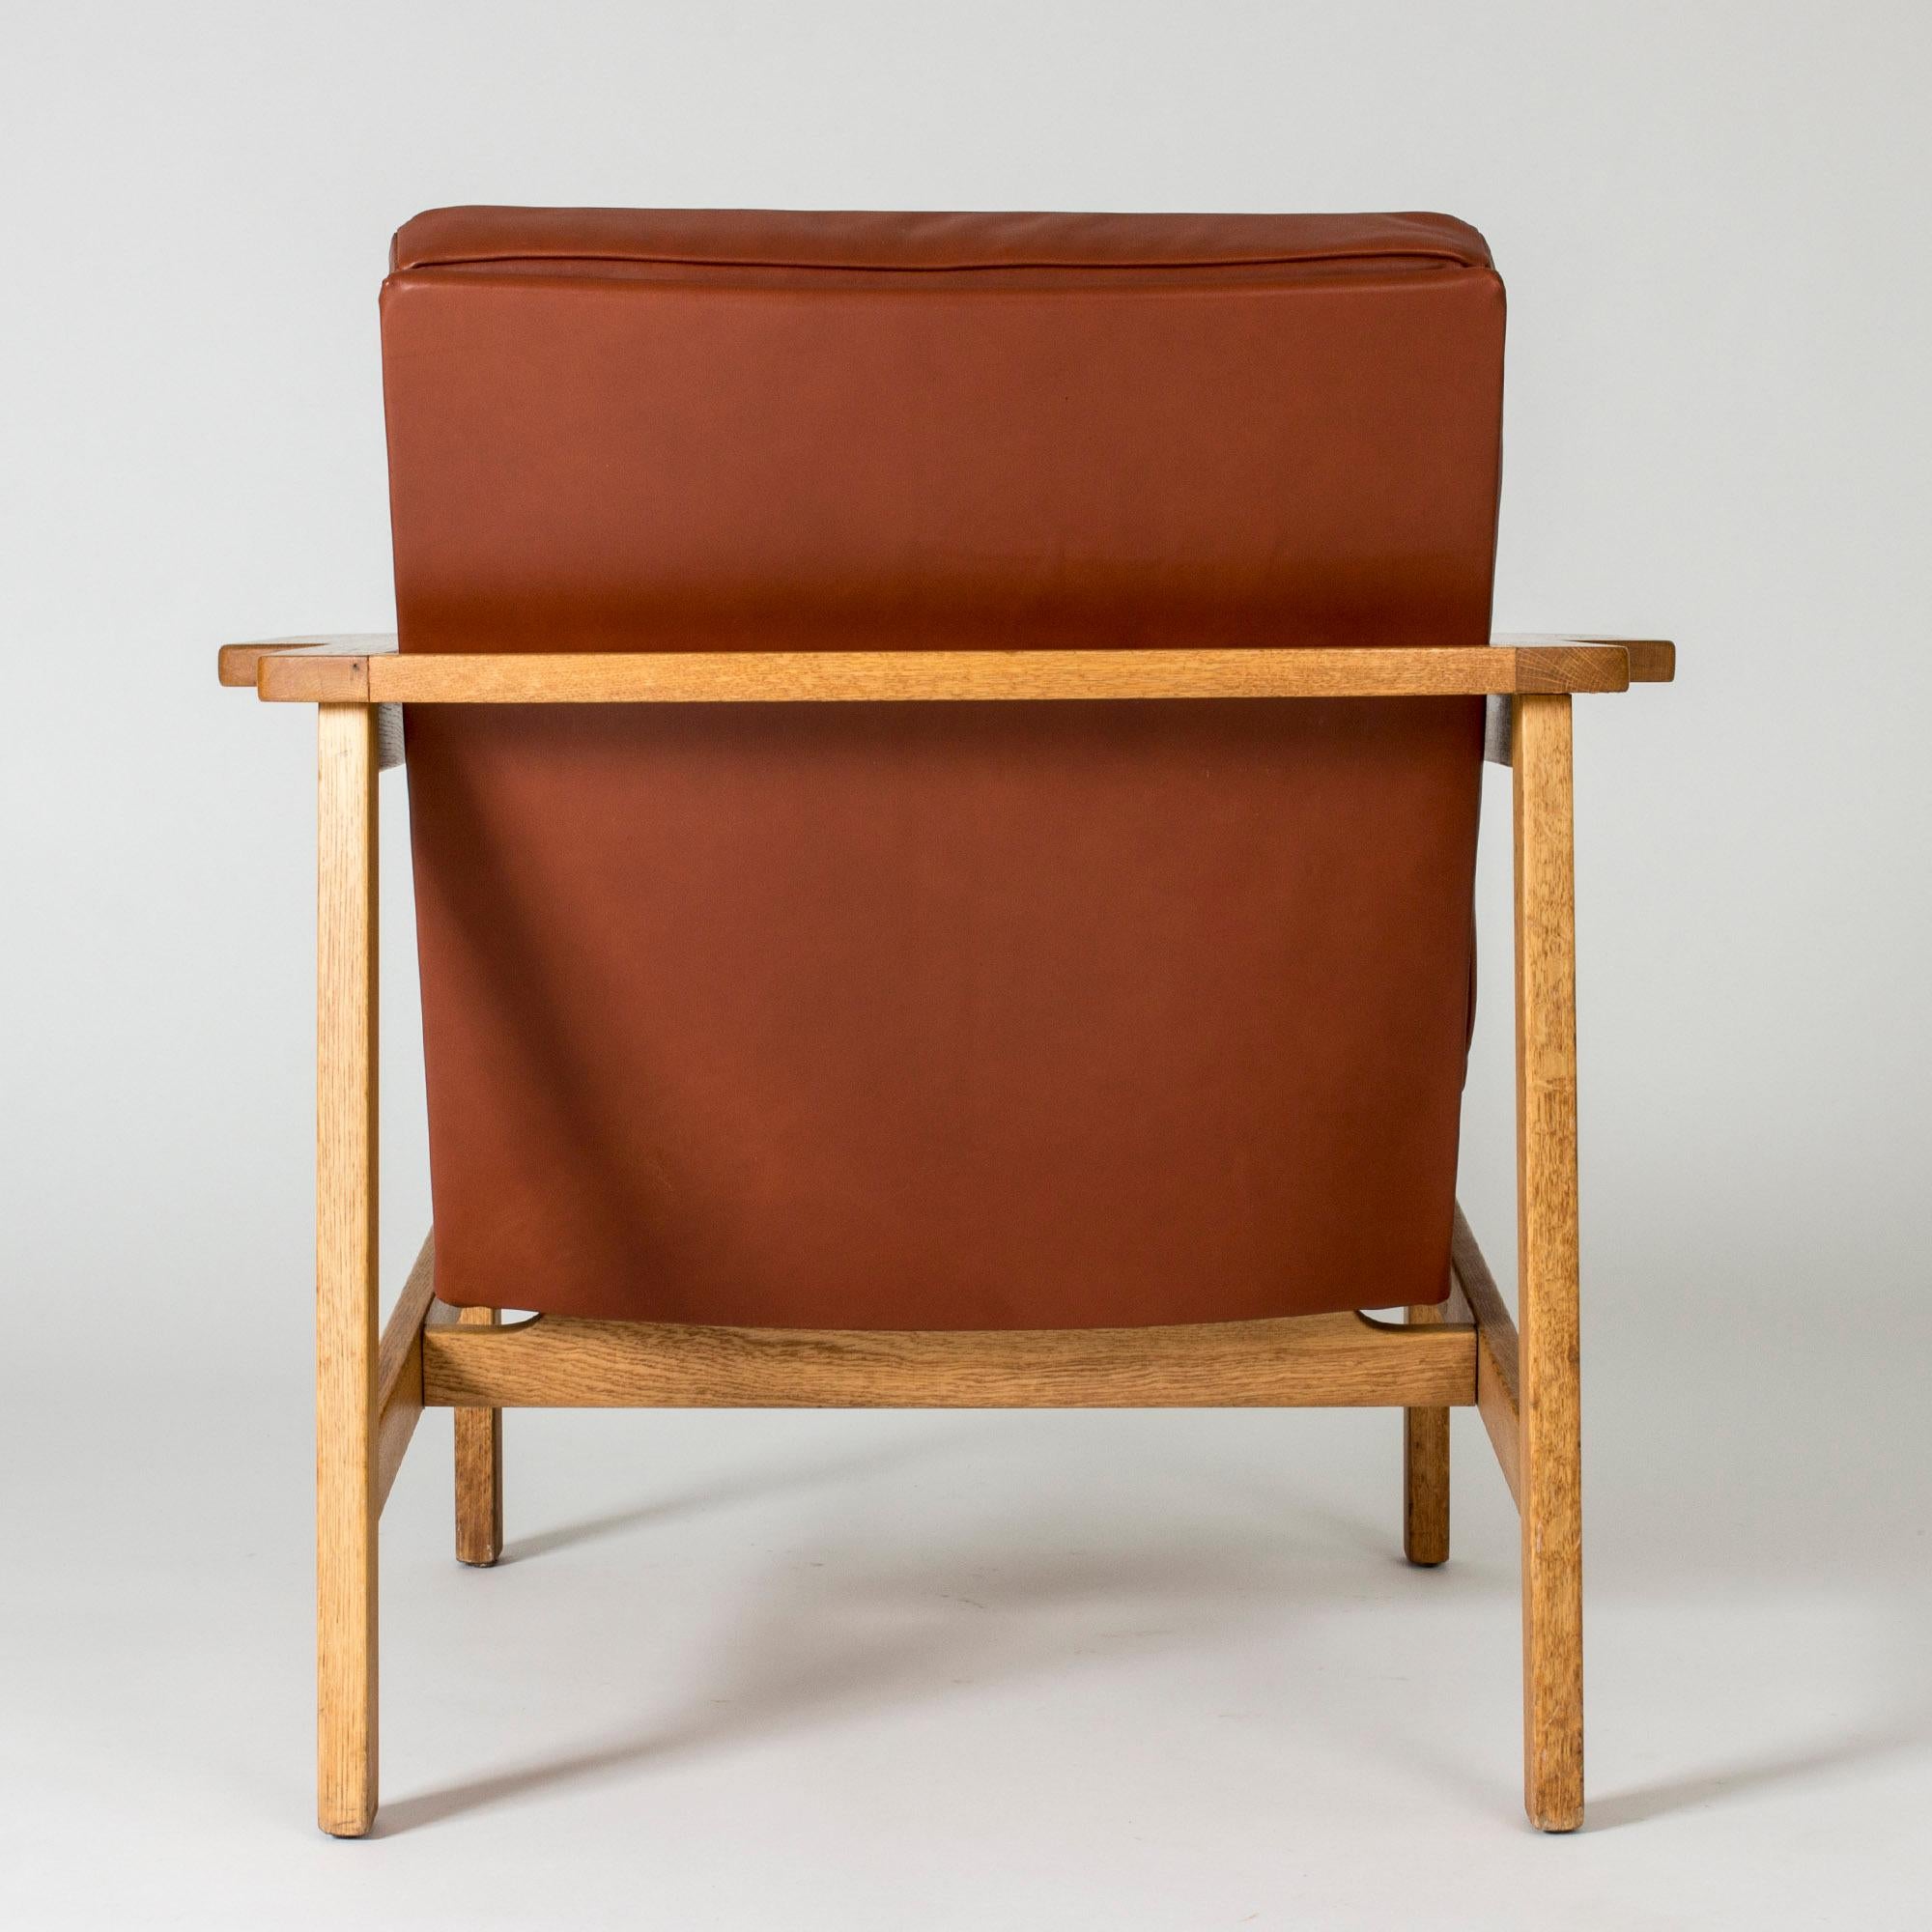 Pair of Lounge Chairs by Carl-Axel Acking for Nordiska Kompaniet, Sweden, 1950s For Sale 1